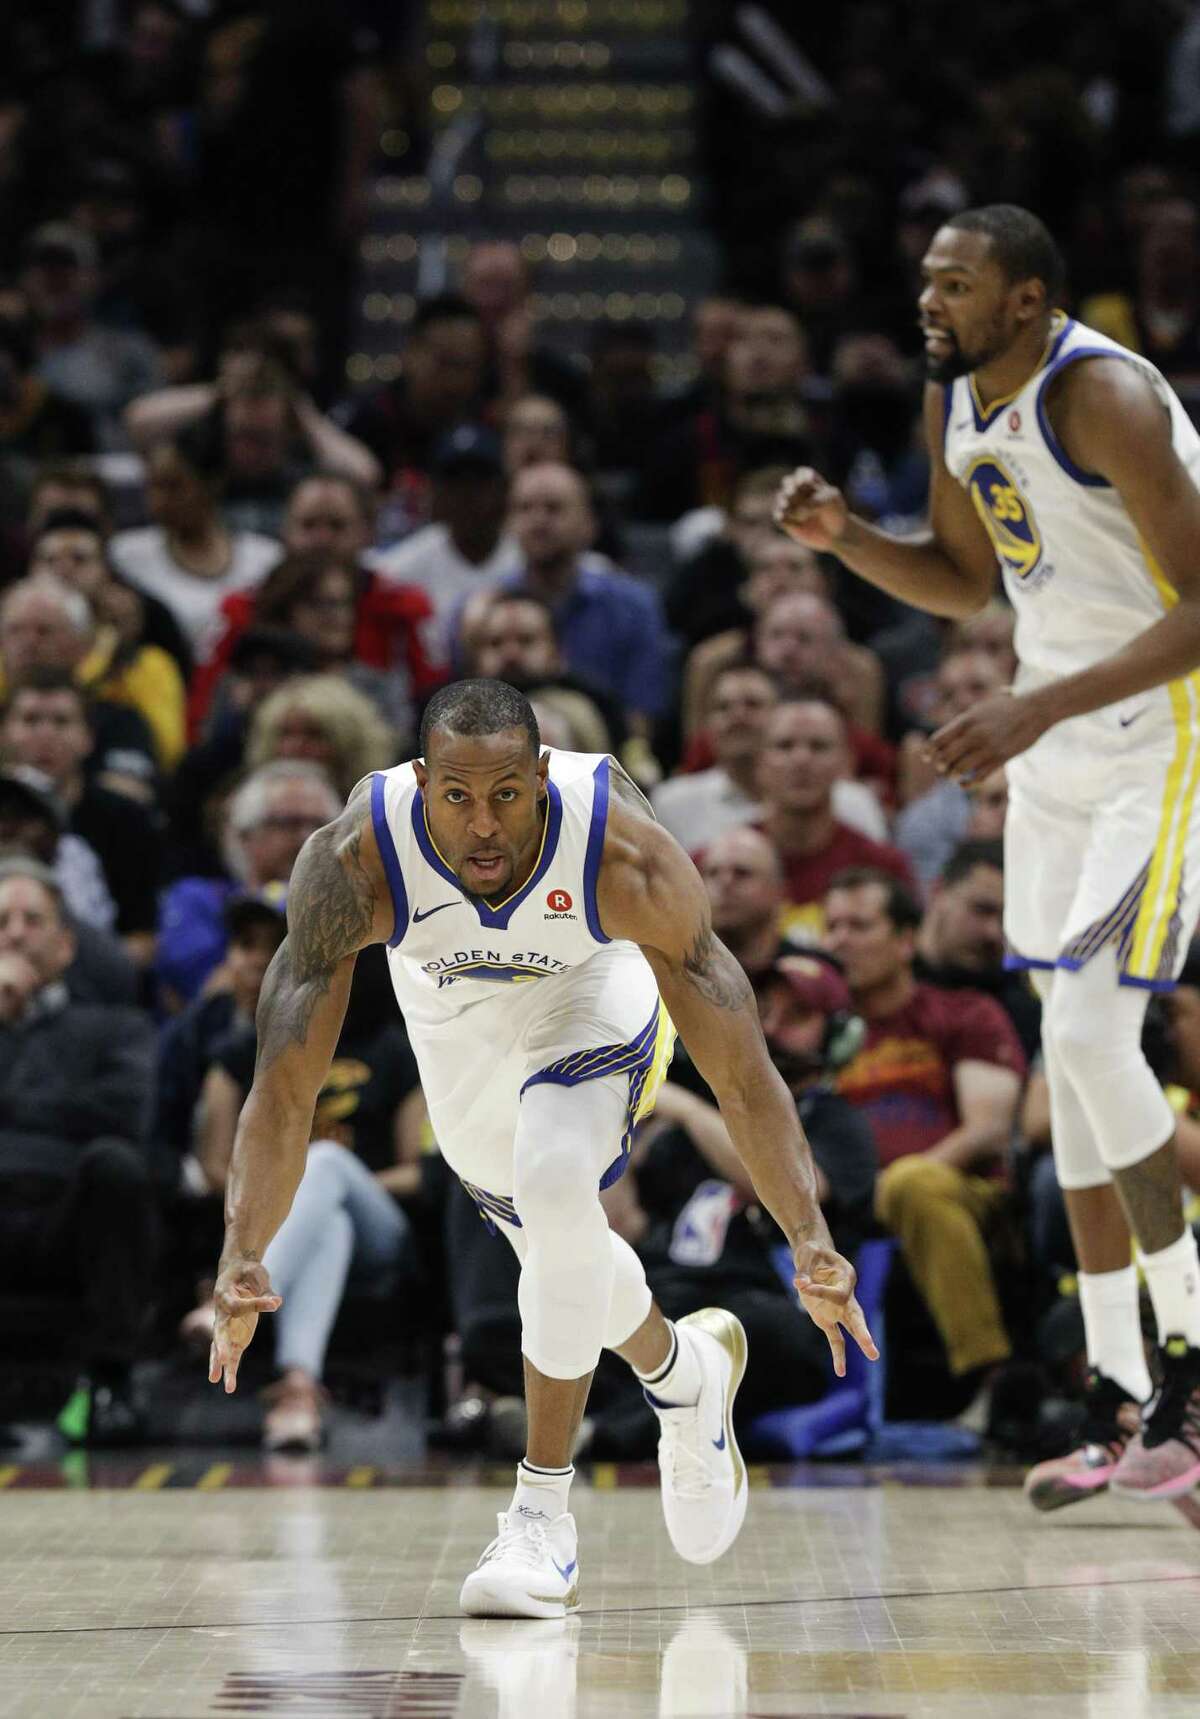 Golden State Warriors' Andre Iguodala reacts after hitting a three-pointer in the second quarter during game 4 of The NBA Finals between the Golden State Warriors and the Cleveland Cavaliers at Oracle Arena on Friday, June 8, 2018 in Cleveland, Ohio.